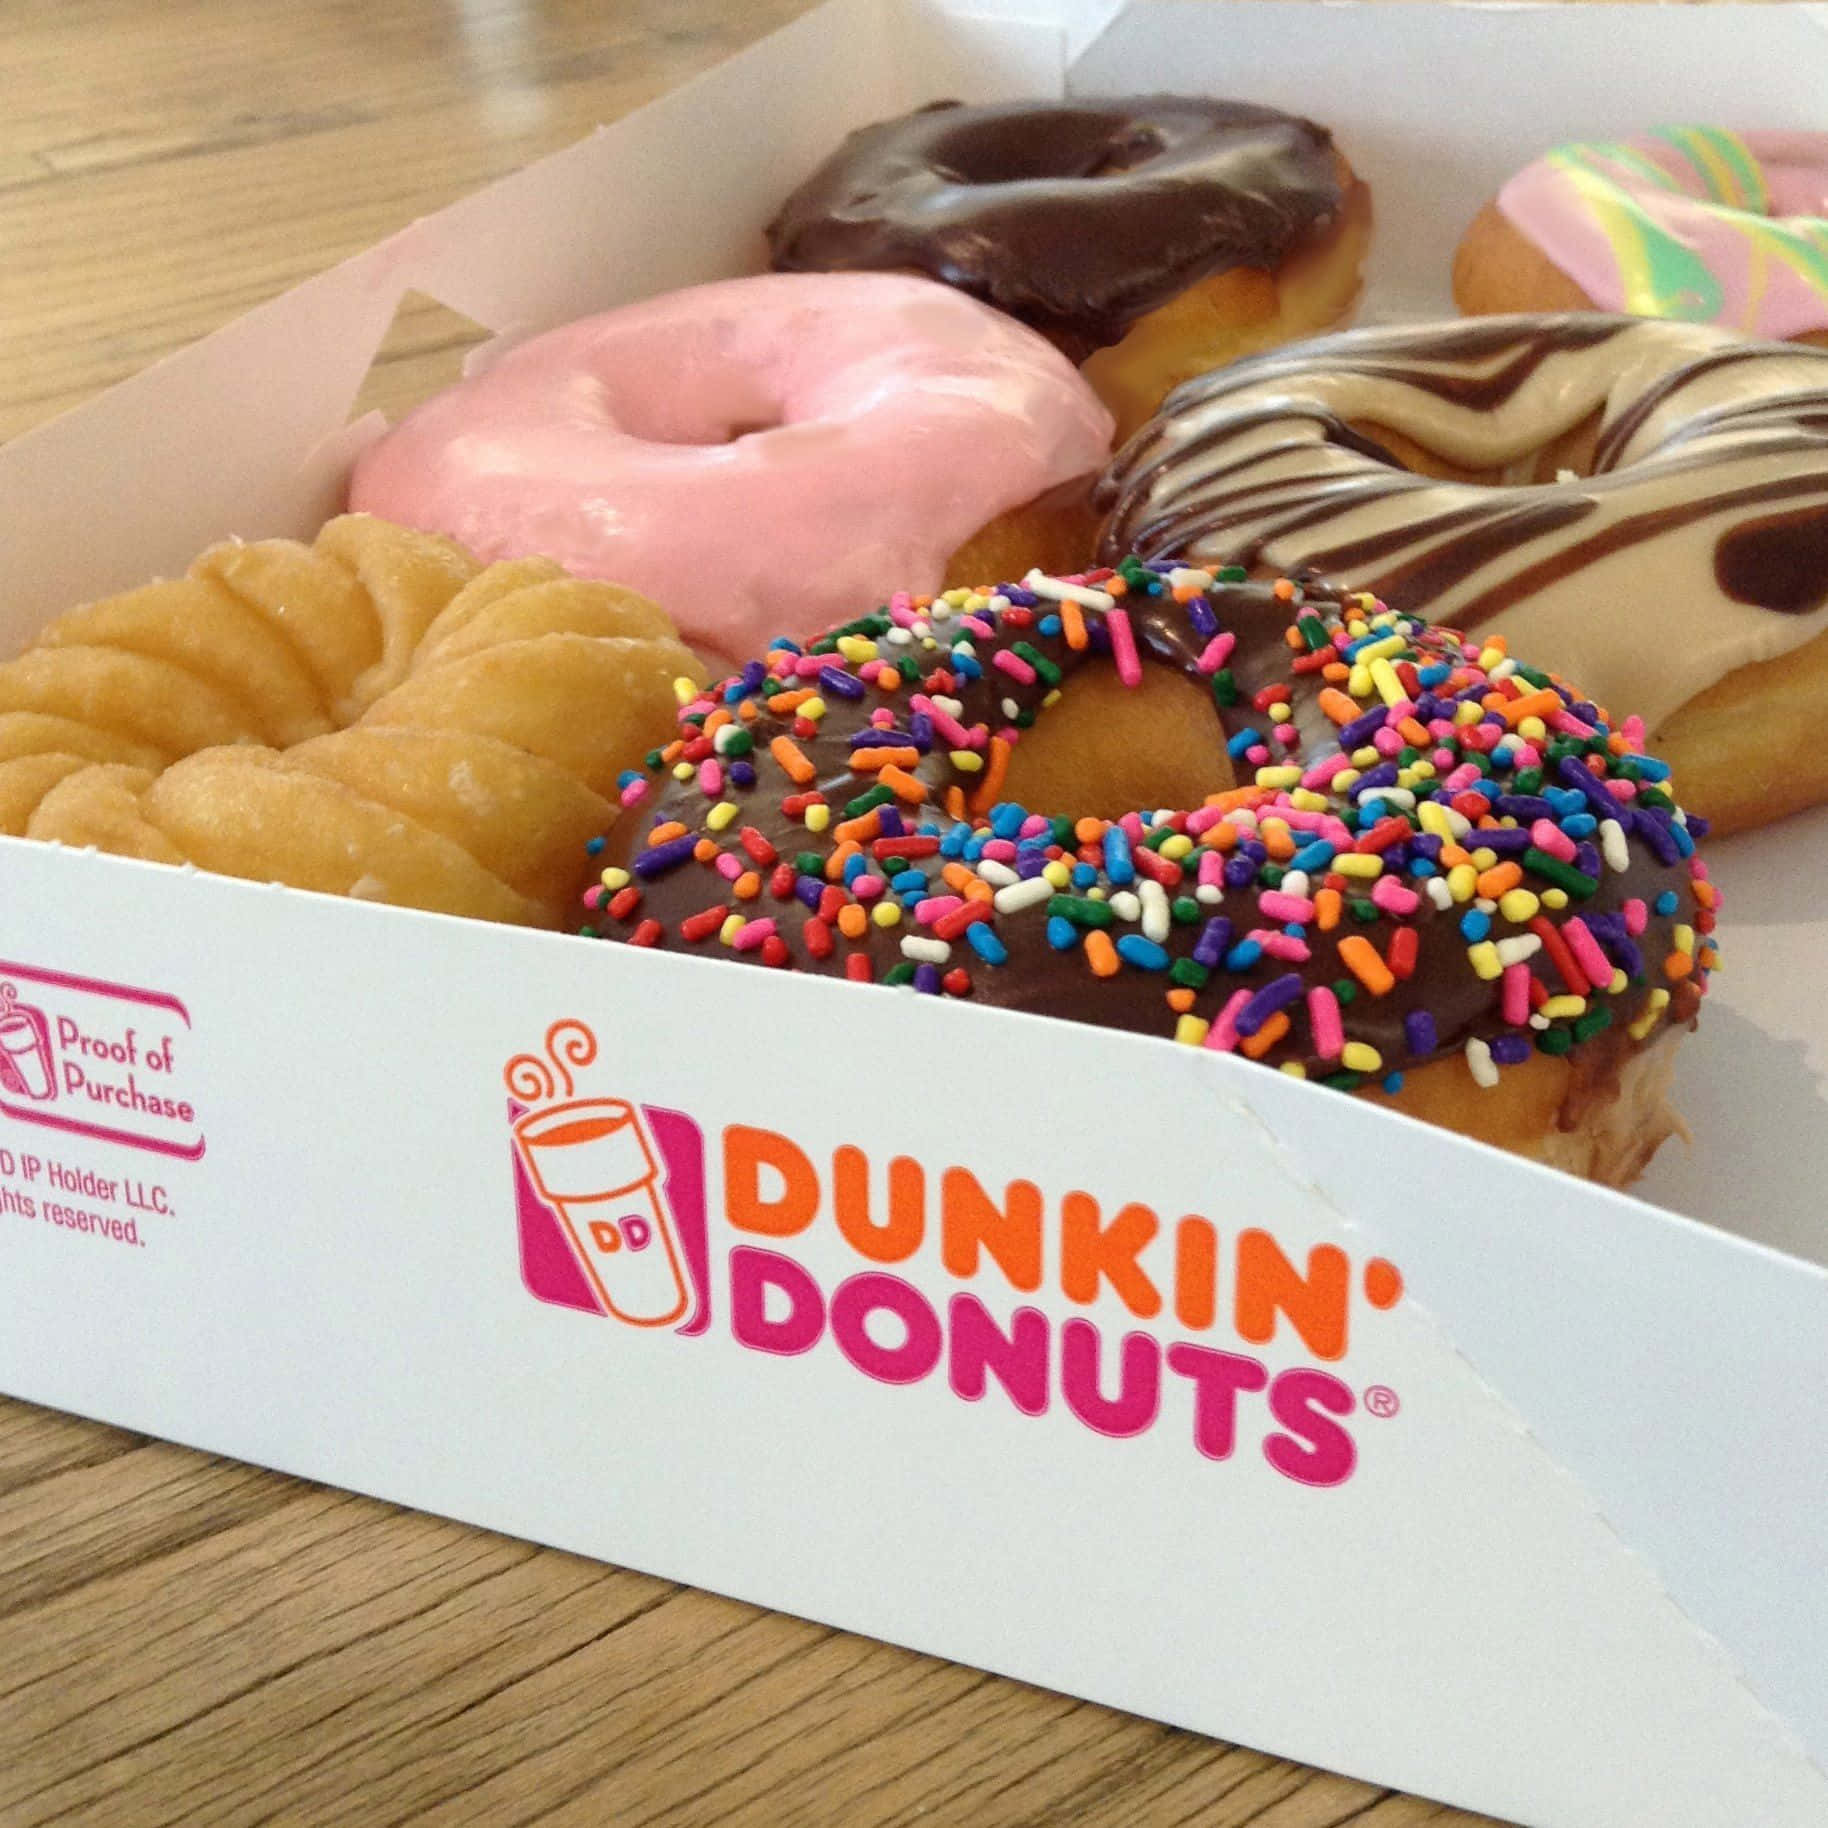 Enjoy your favorite Dunkin Donuts beverage and snack!